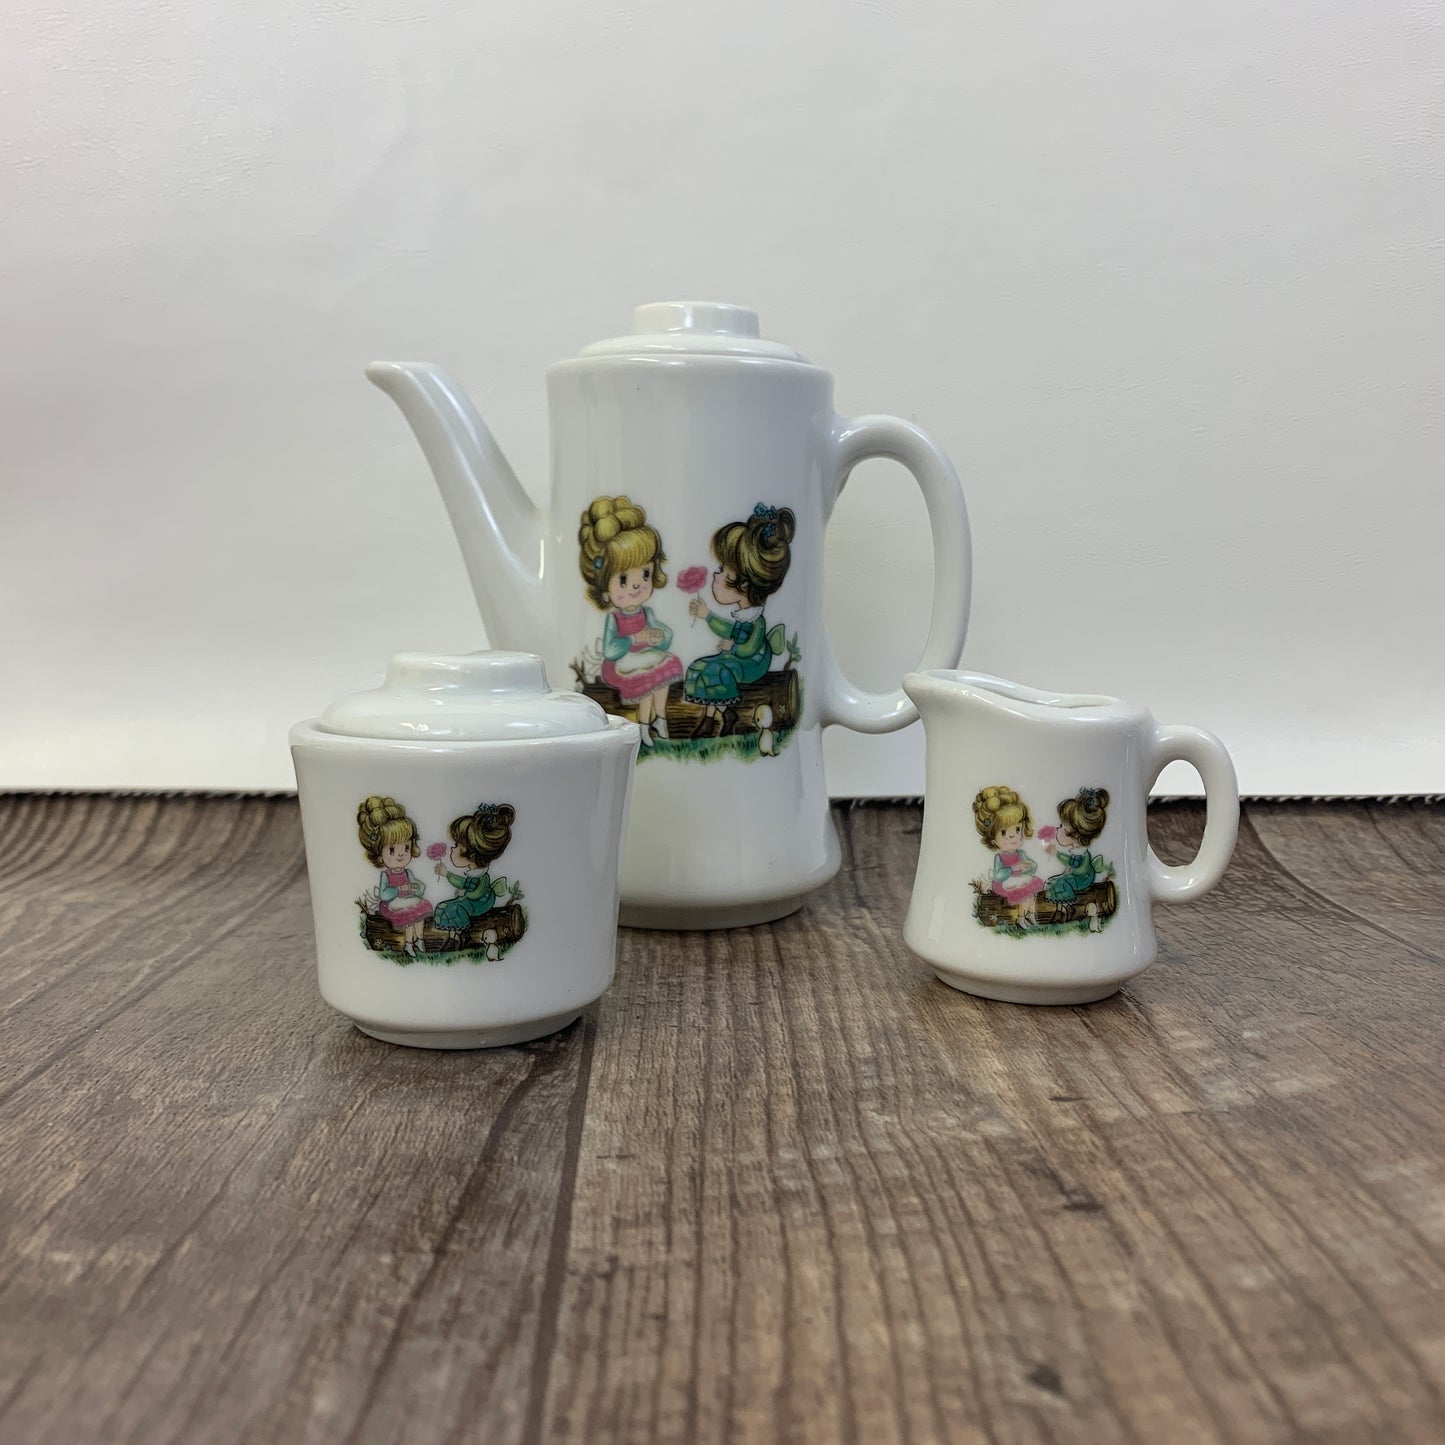 Child Size Teapot and Cream and Sugar with Two Little Girls, Mini Coffee Pot with Decal Small Ceramic Teapot Made in Japan